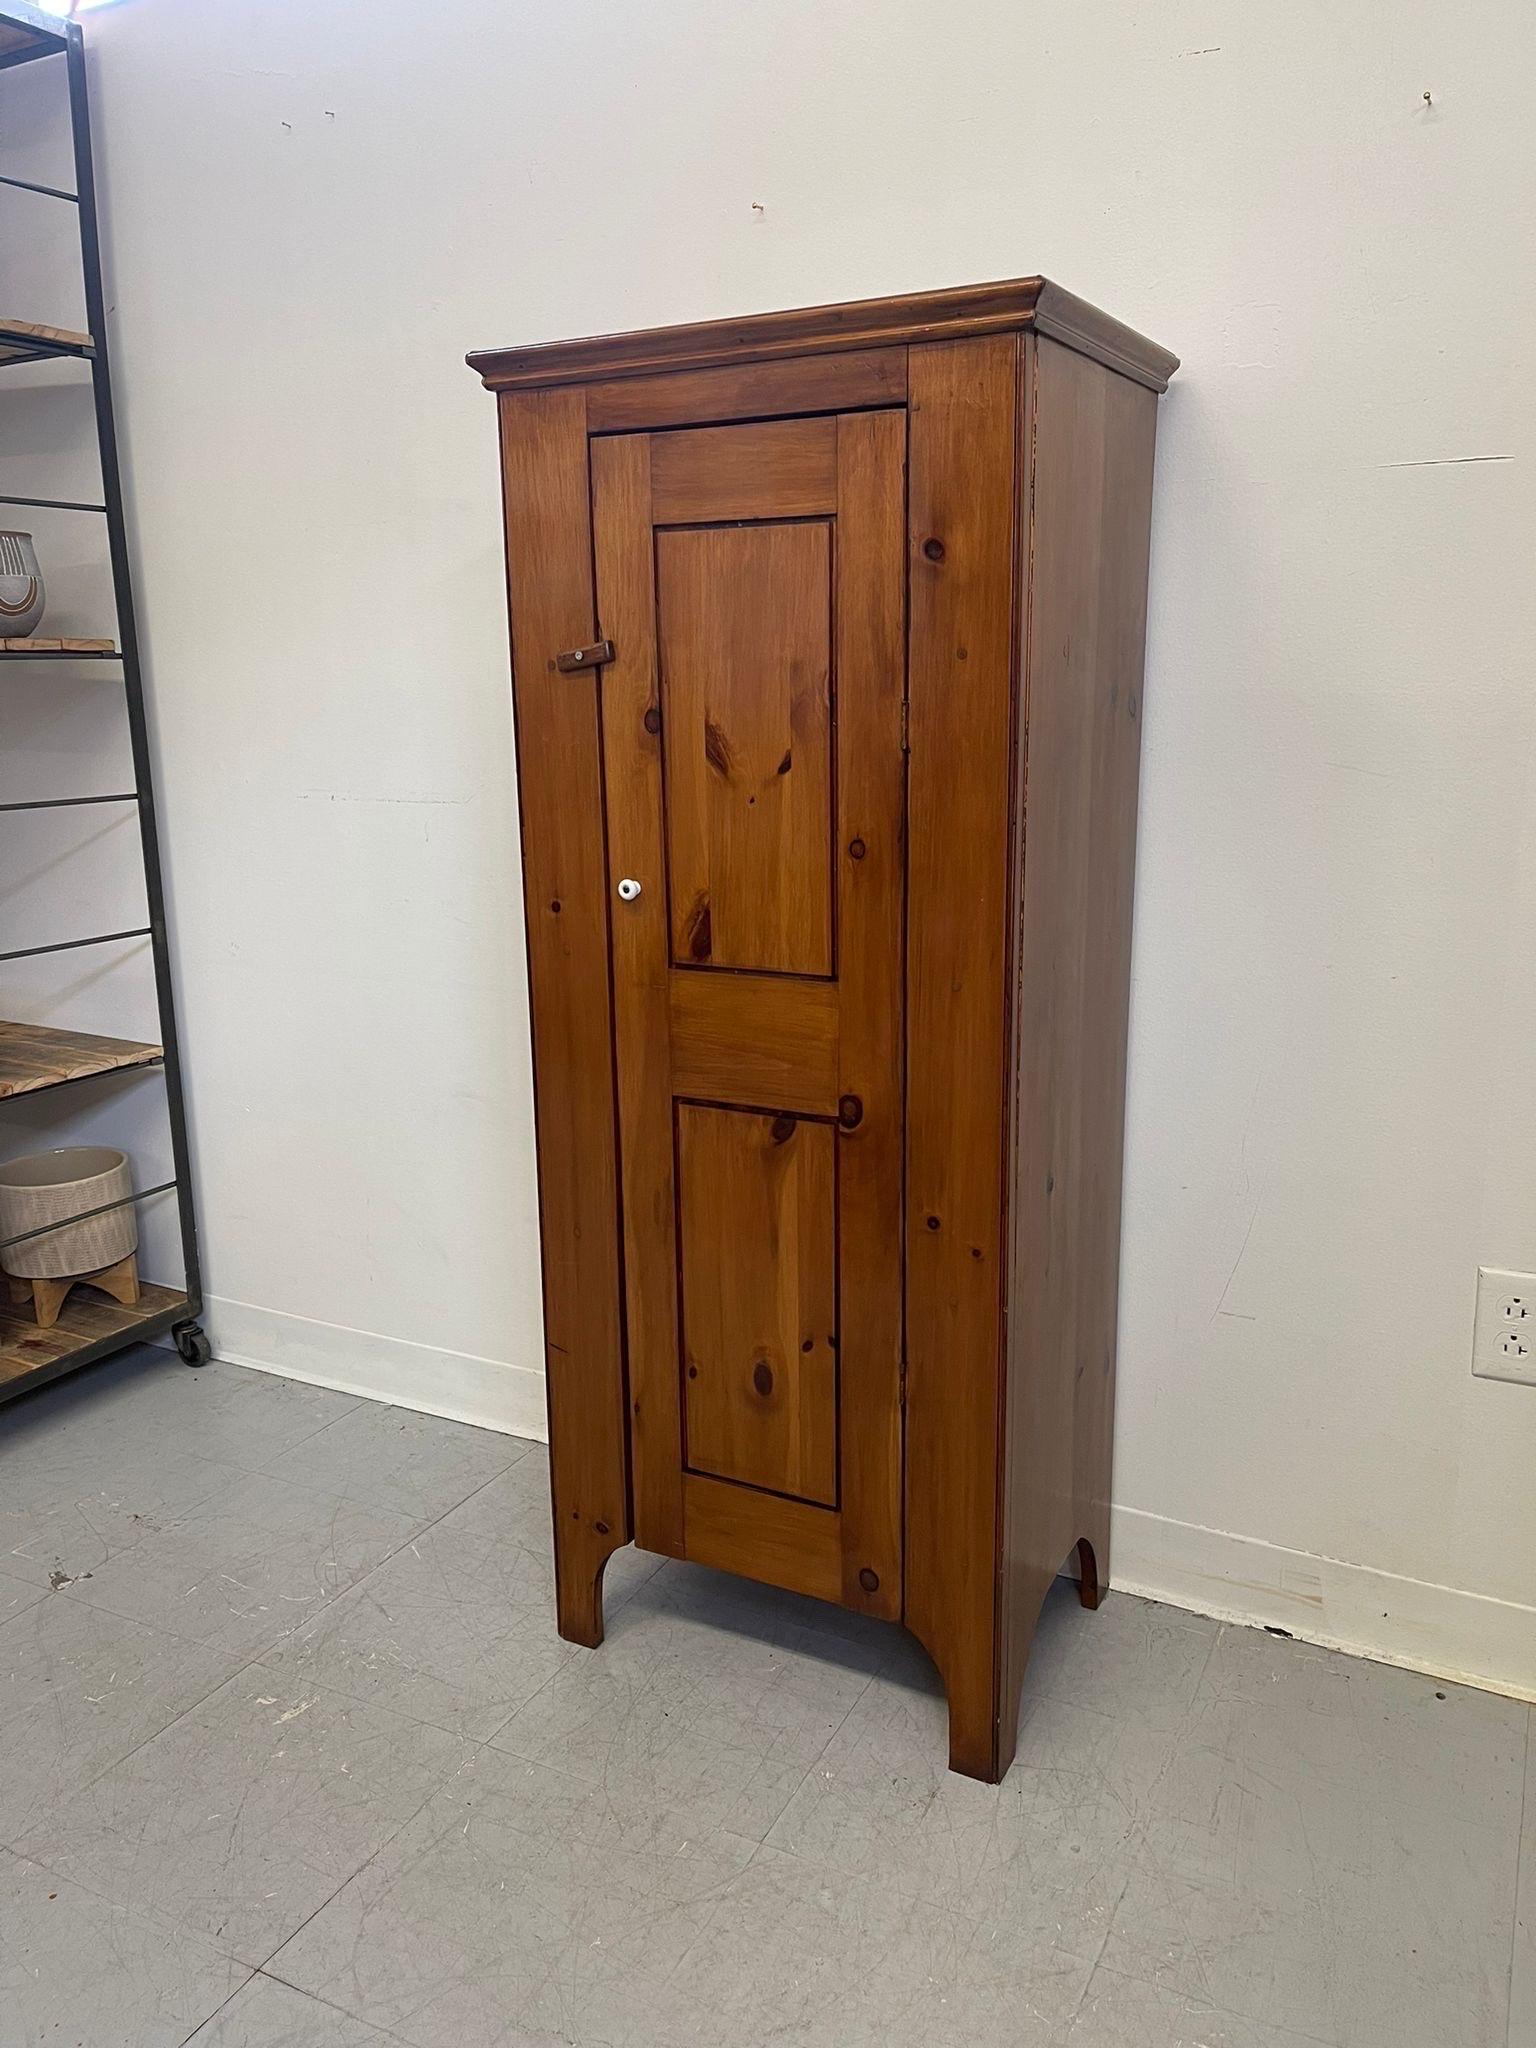 The interior of this cabinet has 4 stationary wooden shelves. White colored Hardware. Small latch on the front prevents the door from sliding open. Vintage Condition Consistent with Age as Pictured.

Dimensions. 21 W ; 15 D ; 52 H